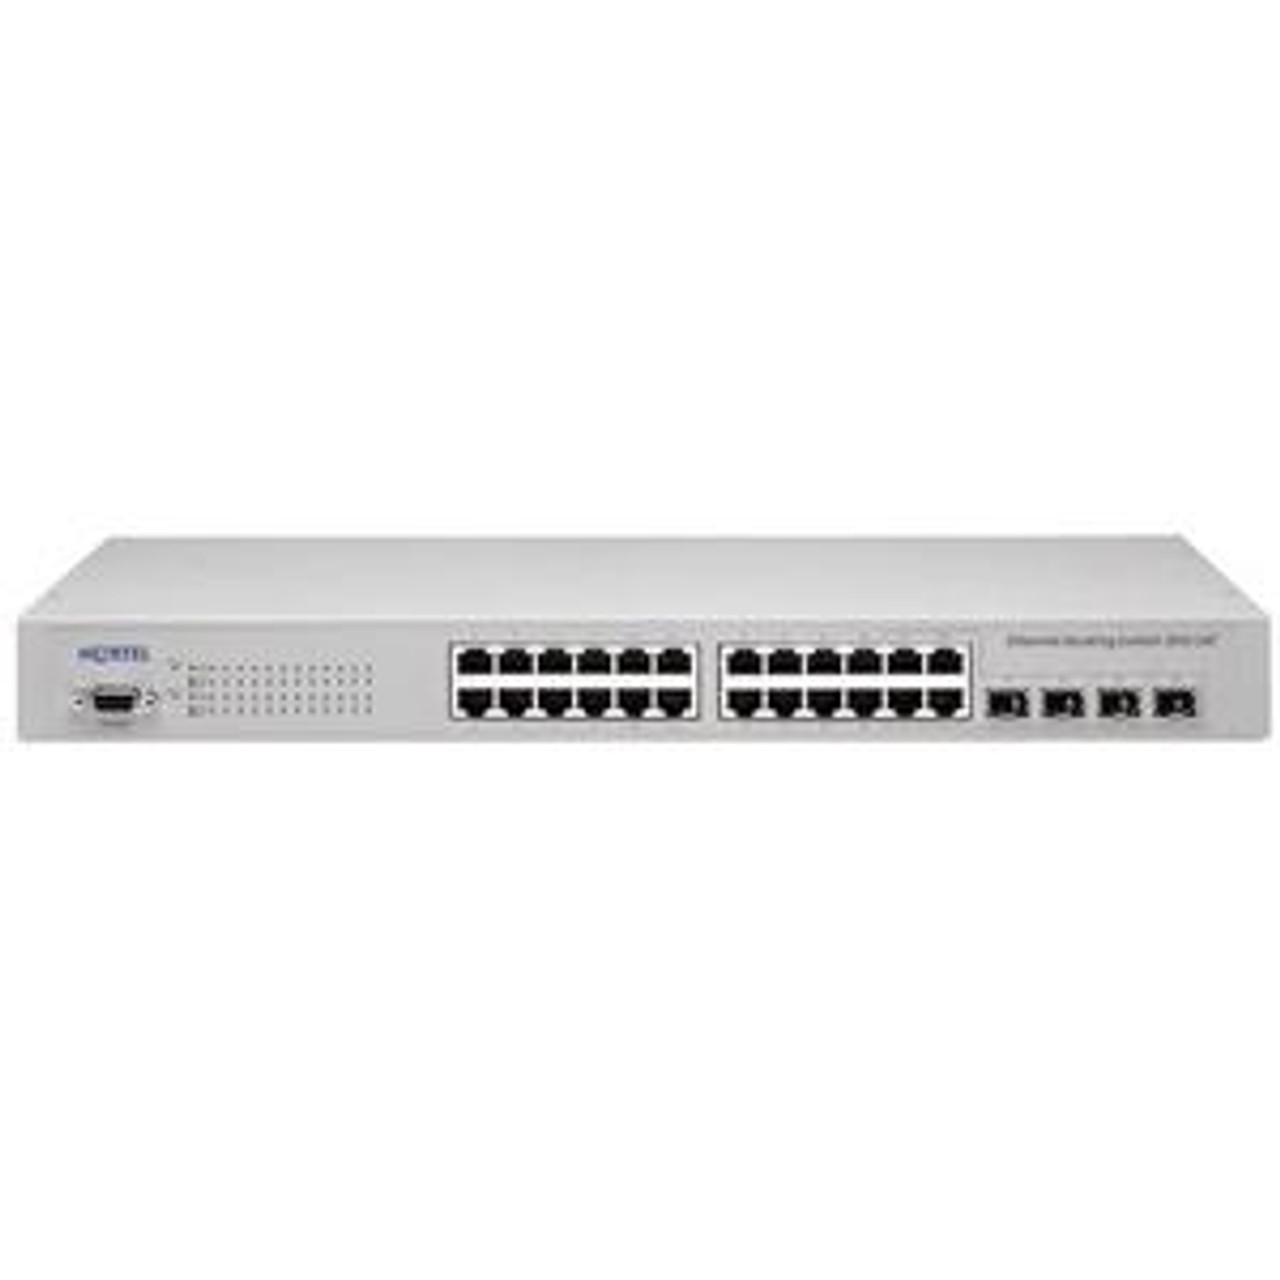 AL1001C08 Nortel Gigabit Ethernet Routing Switch 5520-24T-PWR with 24-Ports 10/100/1000 SFP IEEE 802.3af Power overEthernet ports plus 4 fiber mini-GBIC